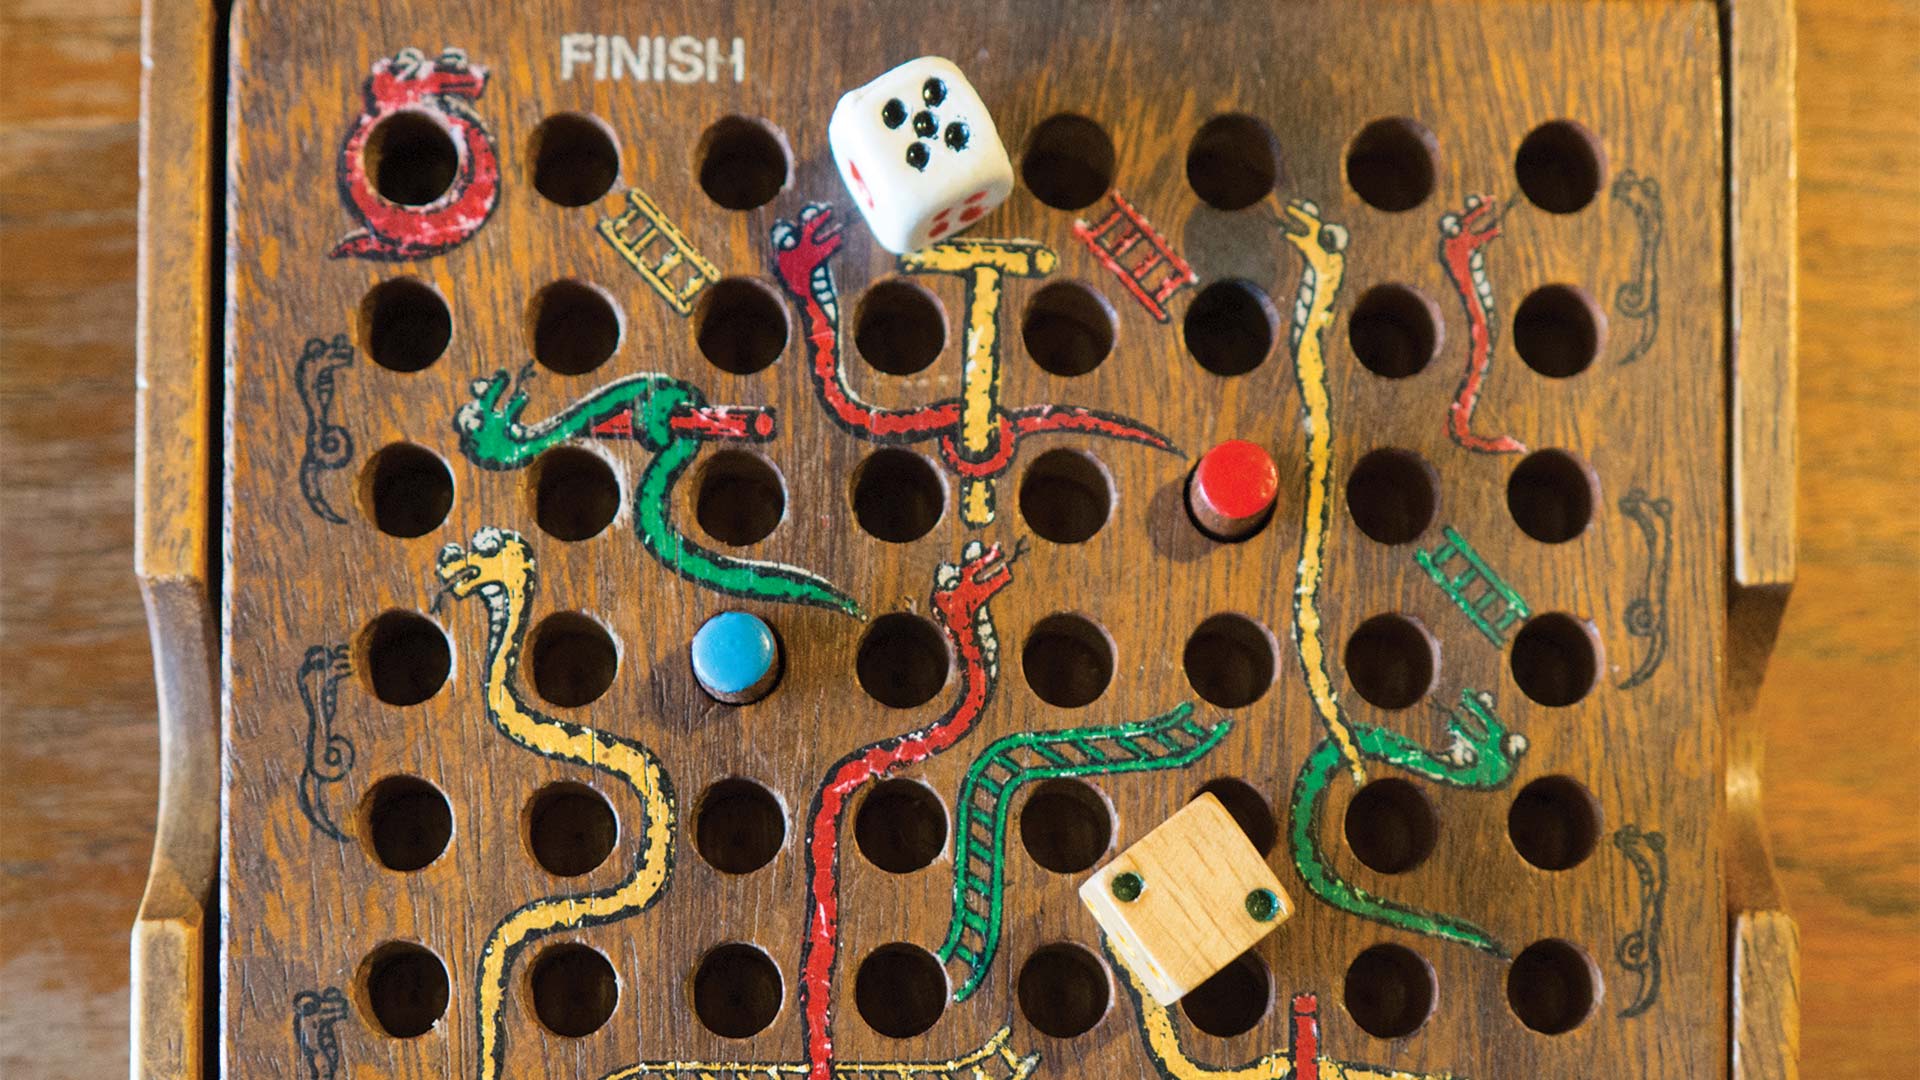 Old style board game of snakes and ladders